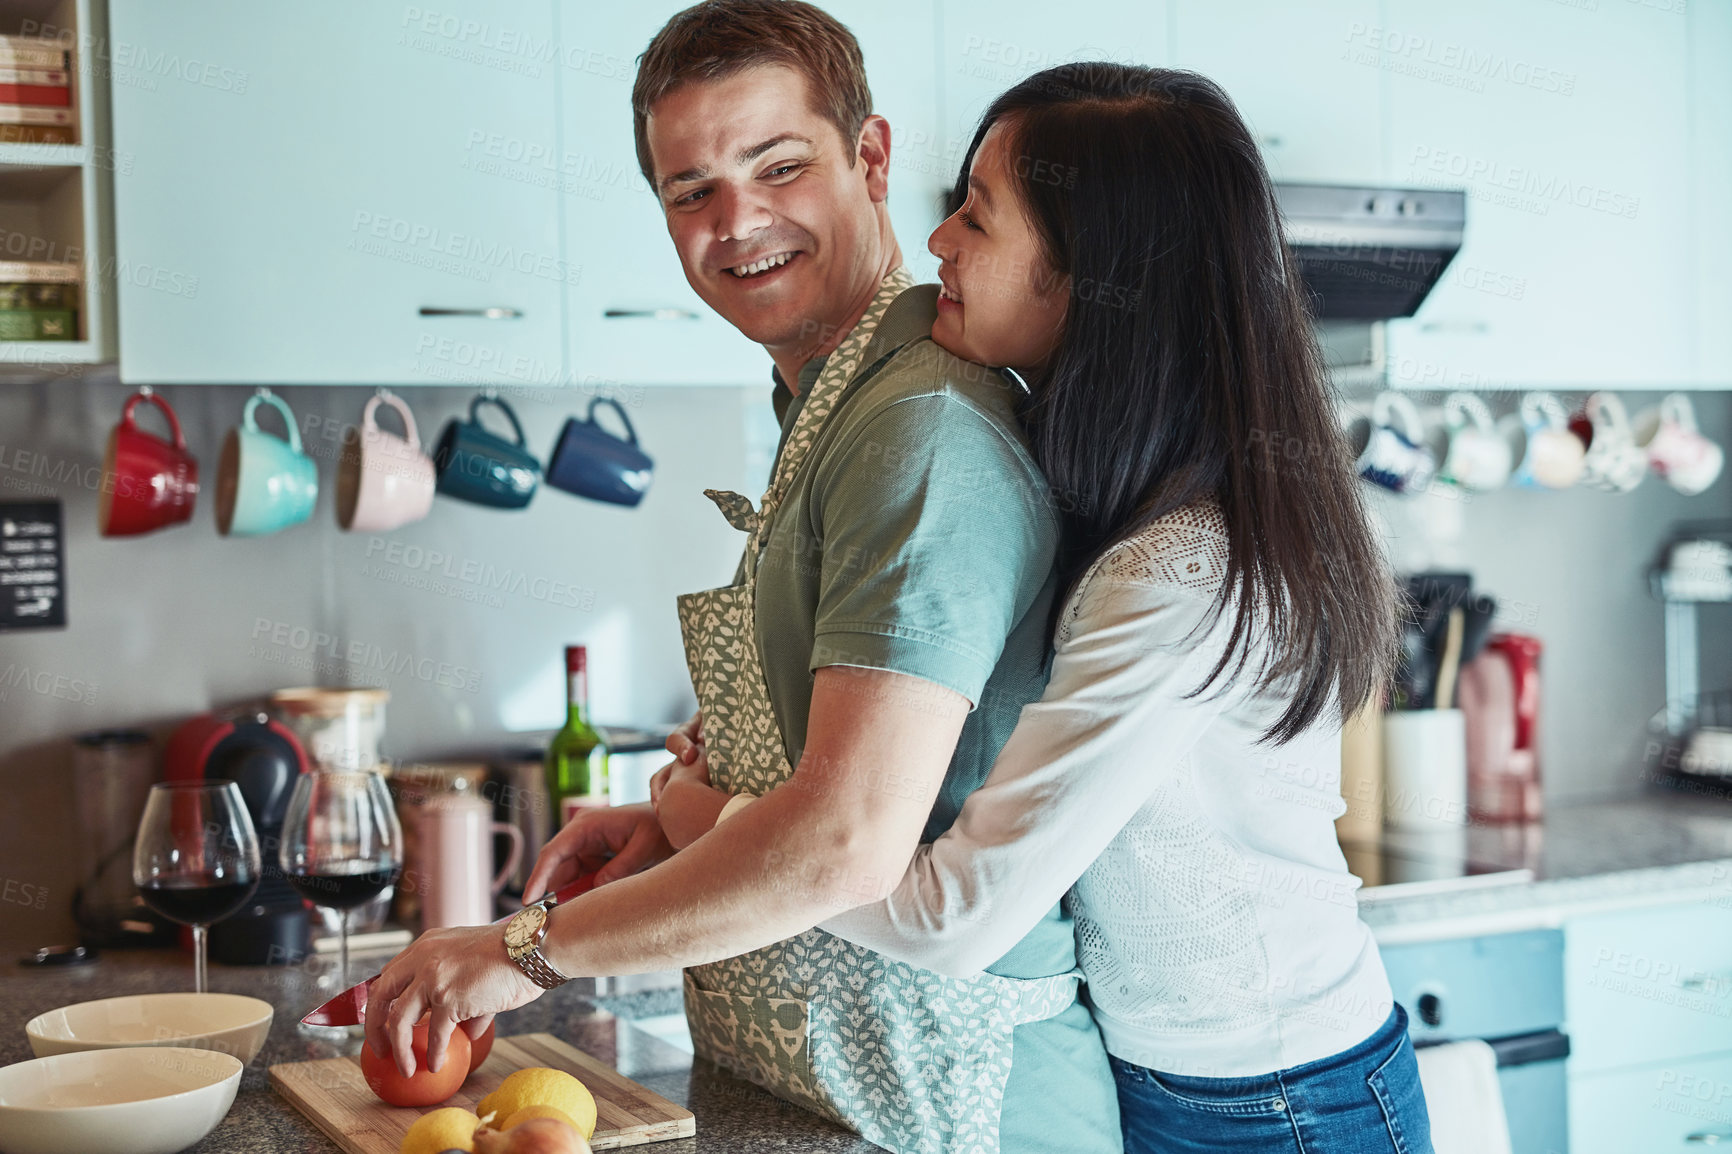 Buy stock photo Cropped shot of an affectionate couple standing in the kitchen